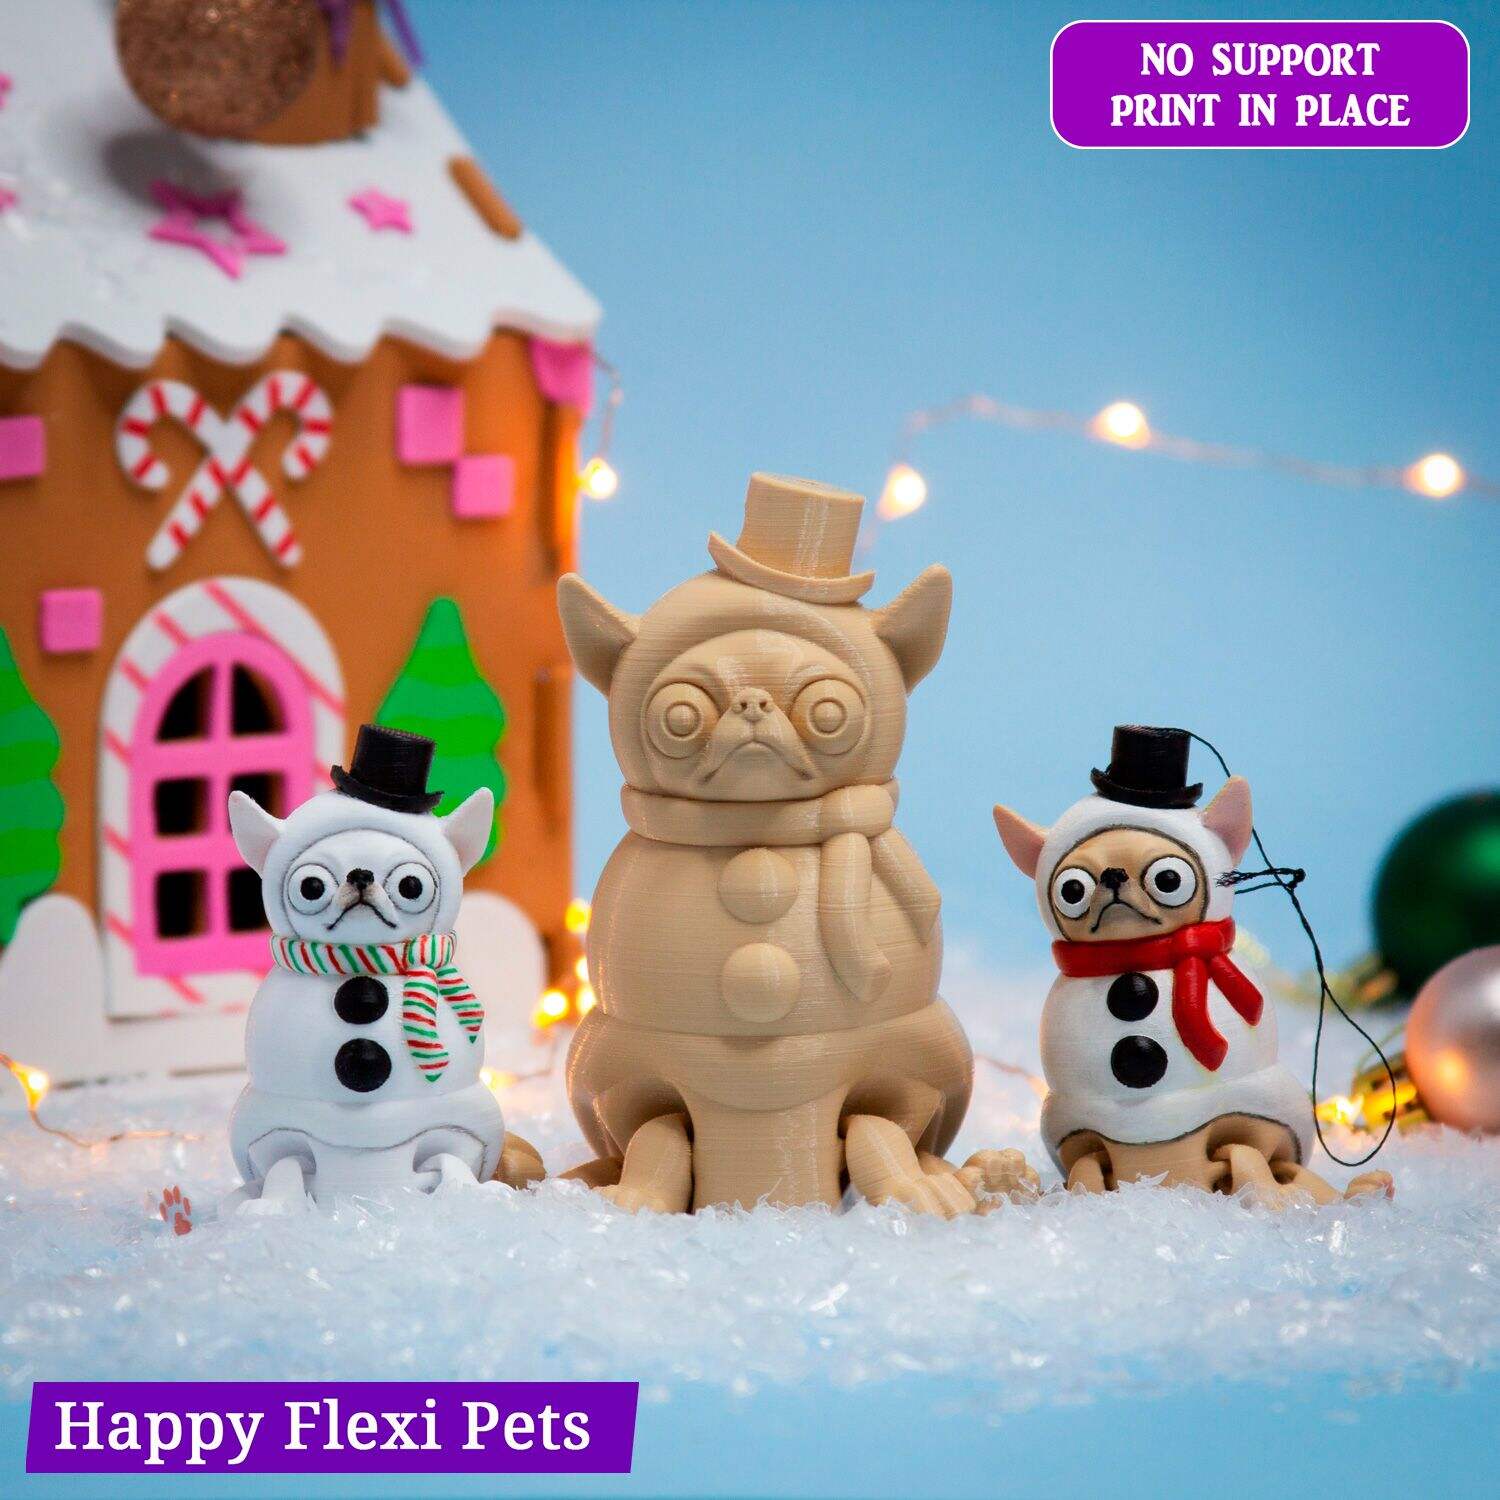 FREE MODEL - Chihuahua the Snowman - Christmas Collection